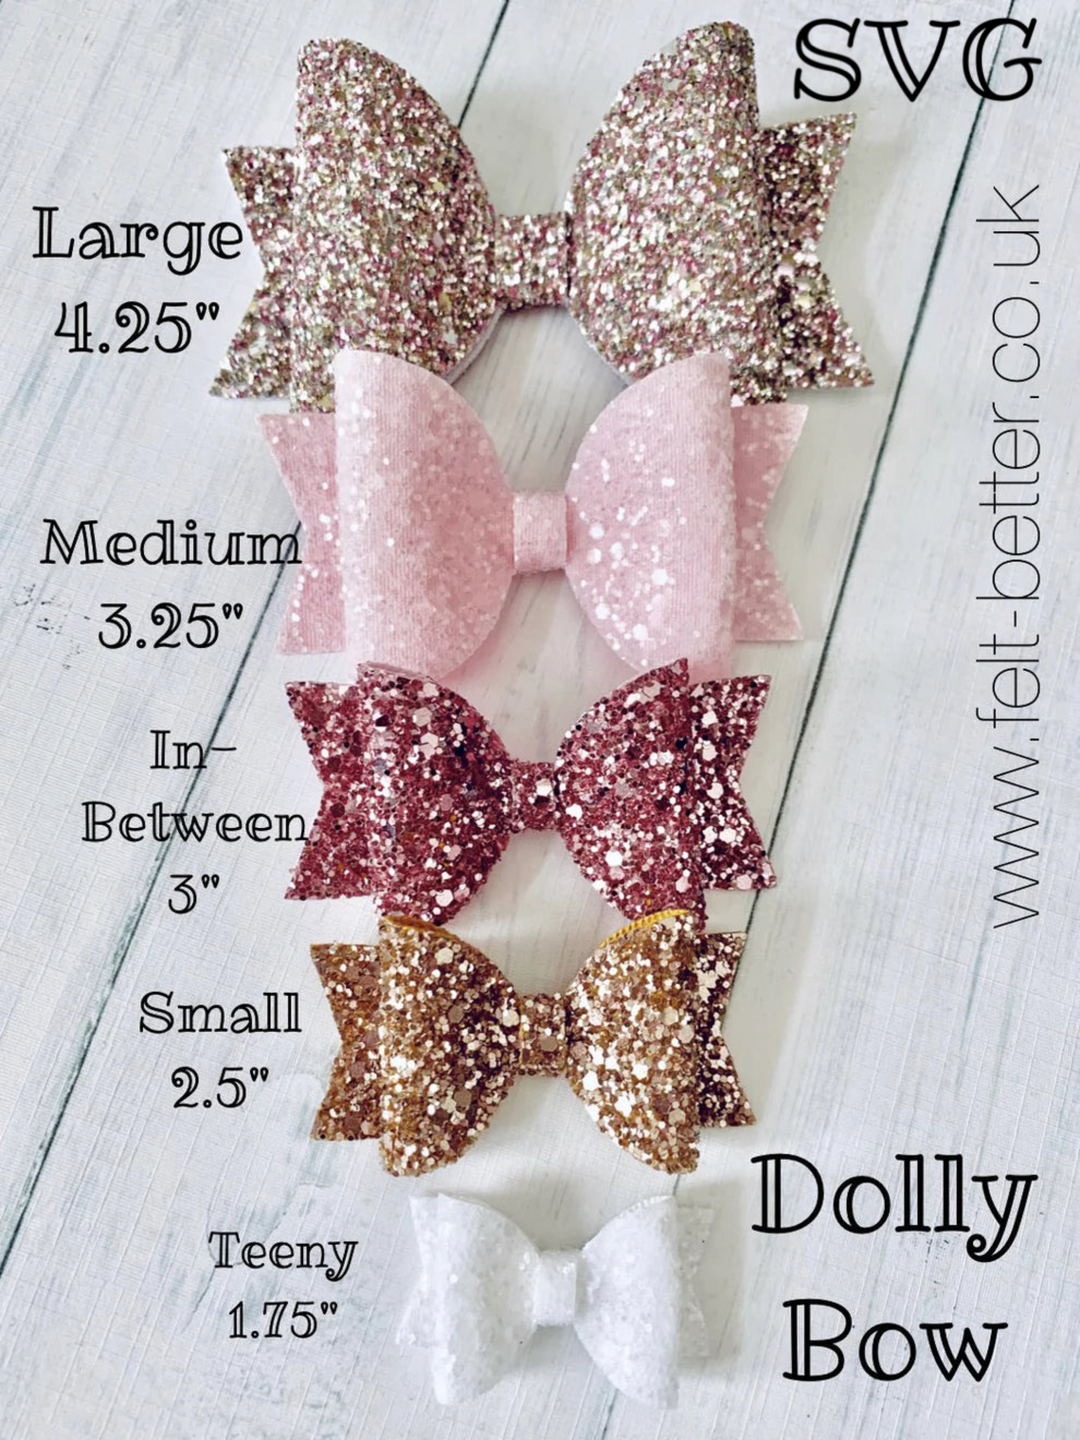 The Original Dolly Bow SVG - Individual Sizes - DIGITAL DOWNLOAD